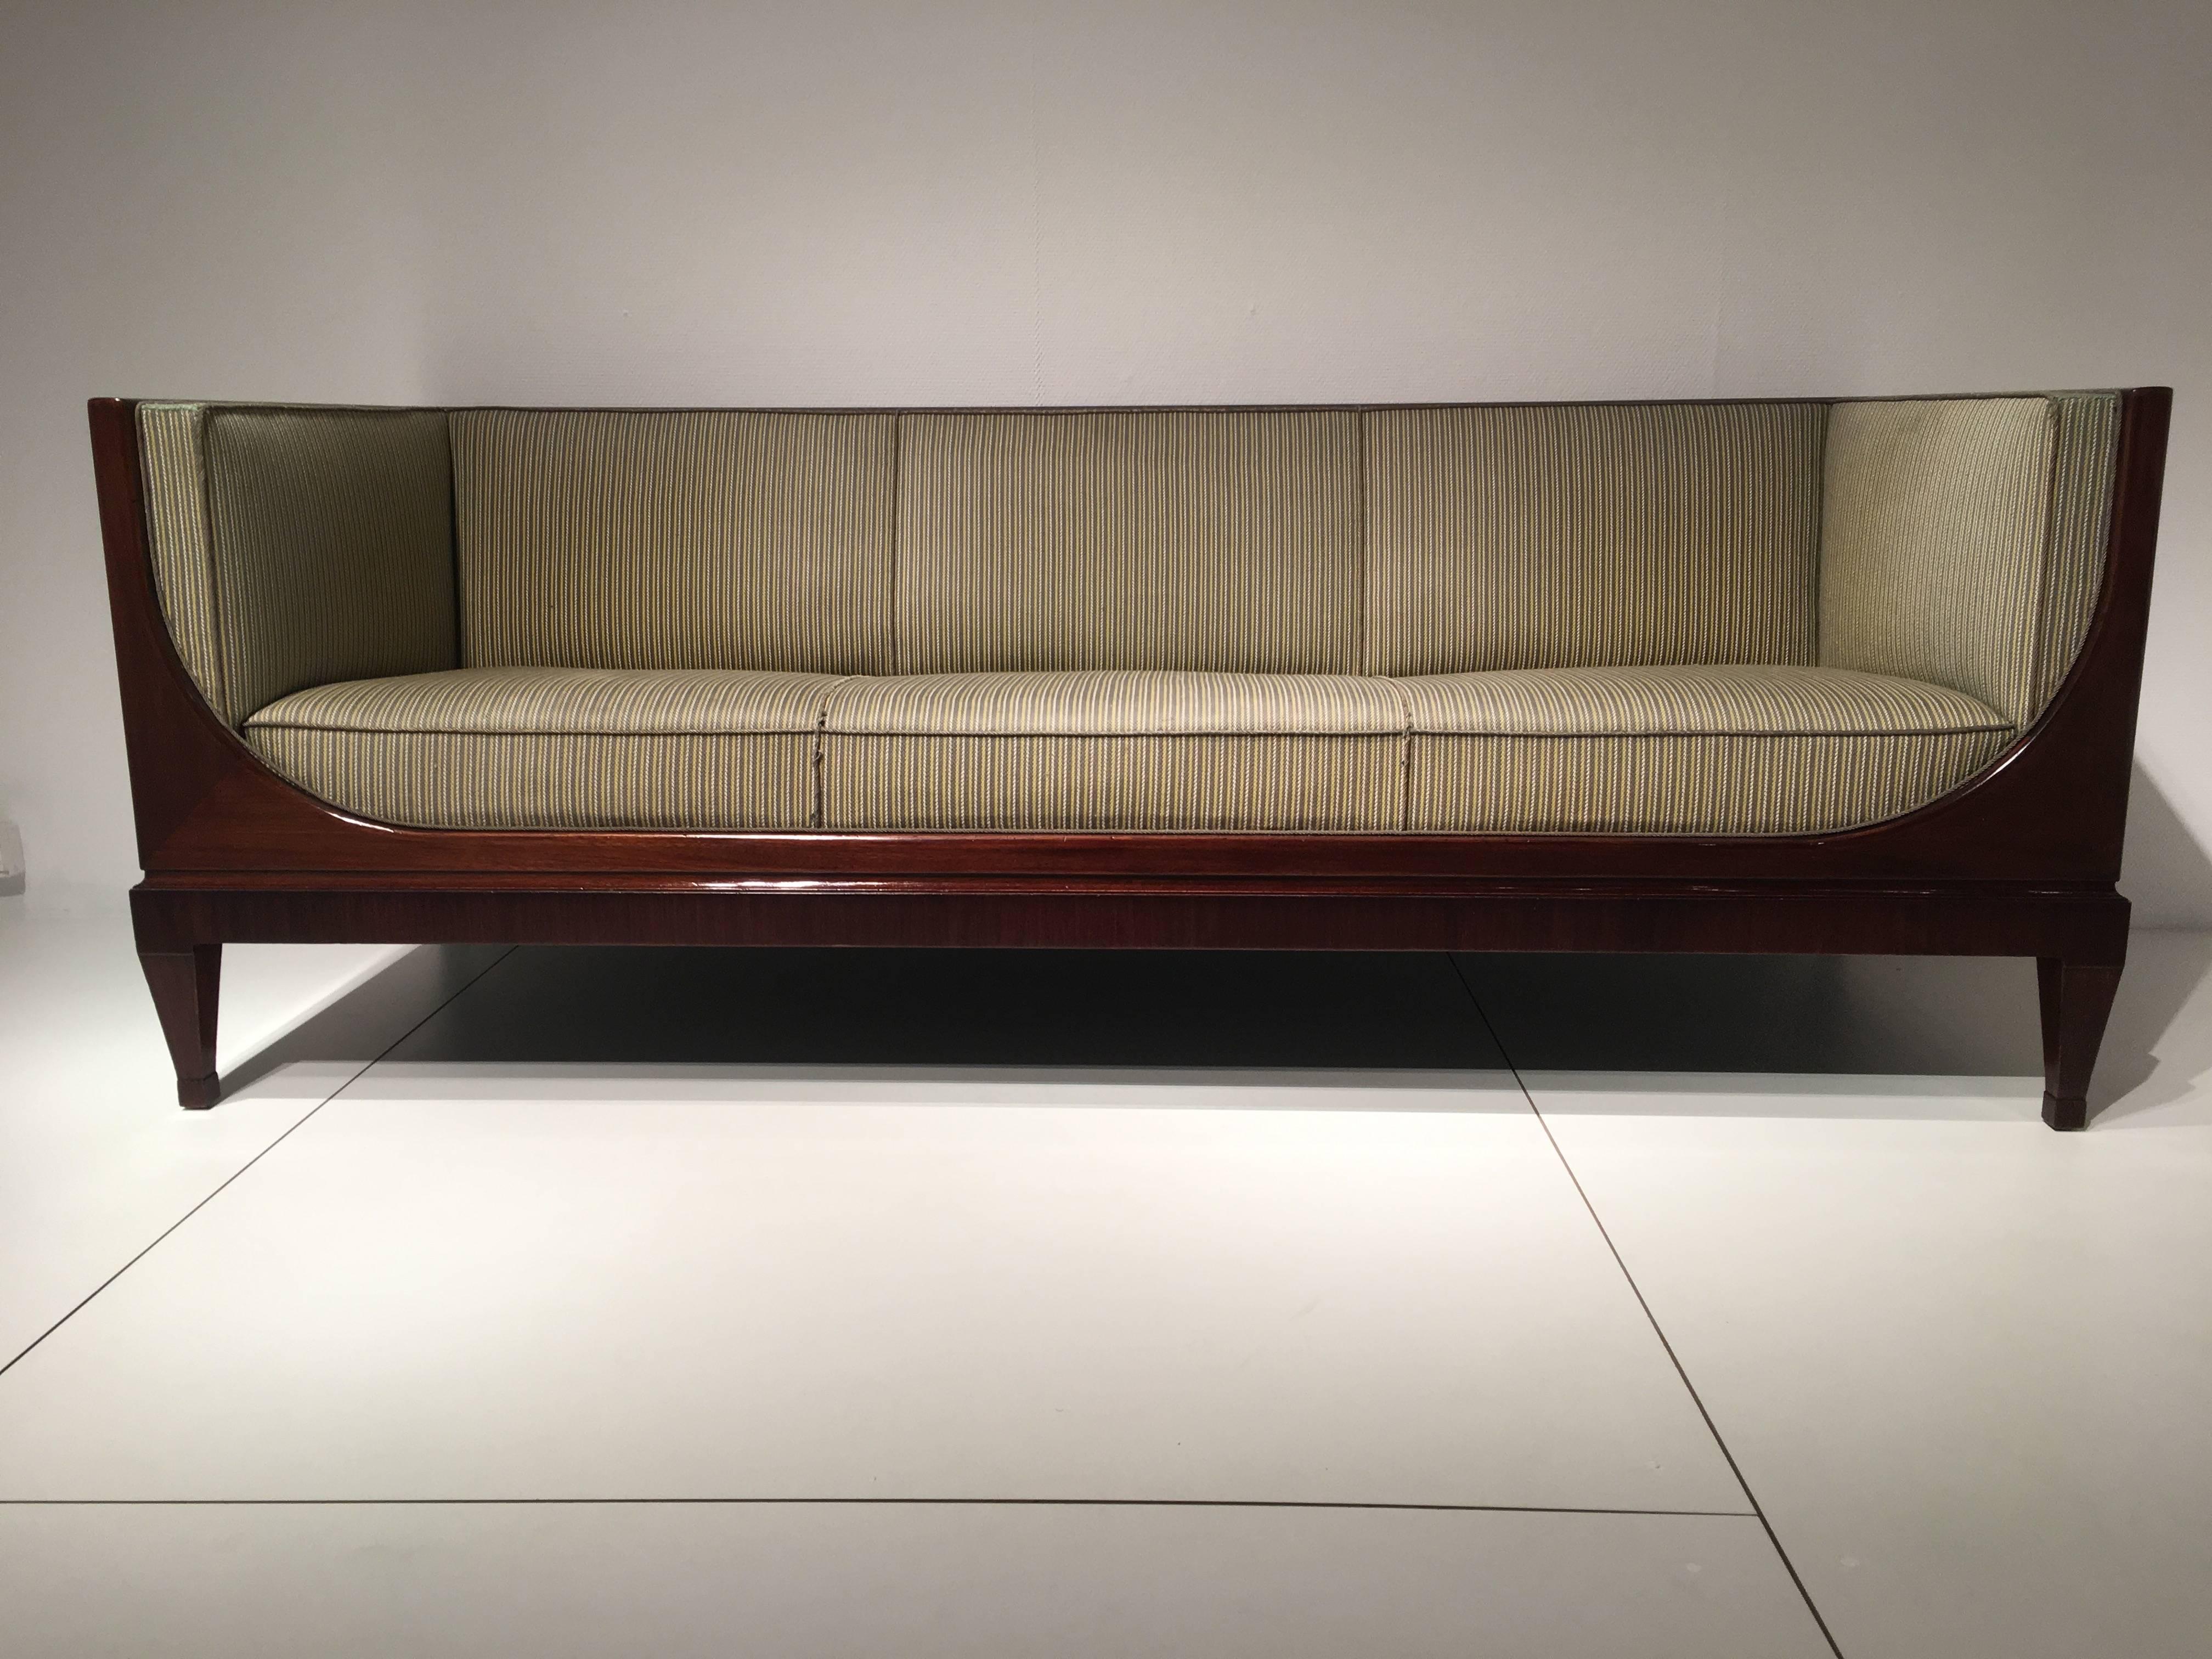 Frits Henningsen sofa in mahogany, 1940. Excellent. Wood has been refinished. Original lining.